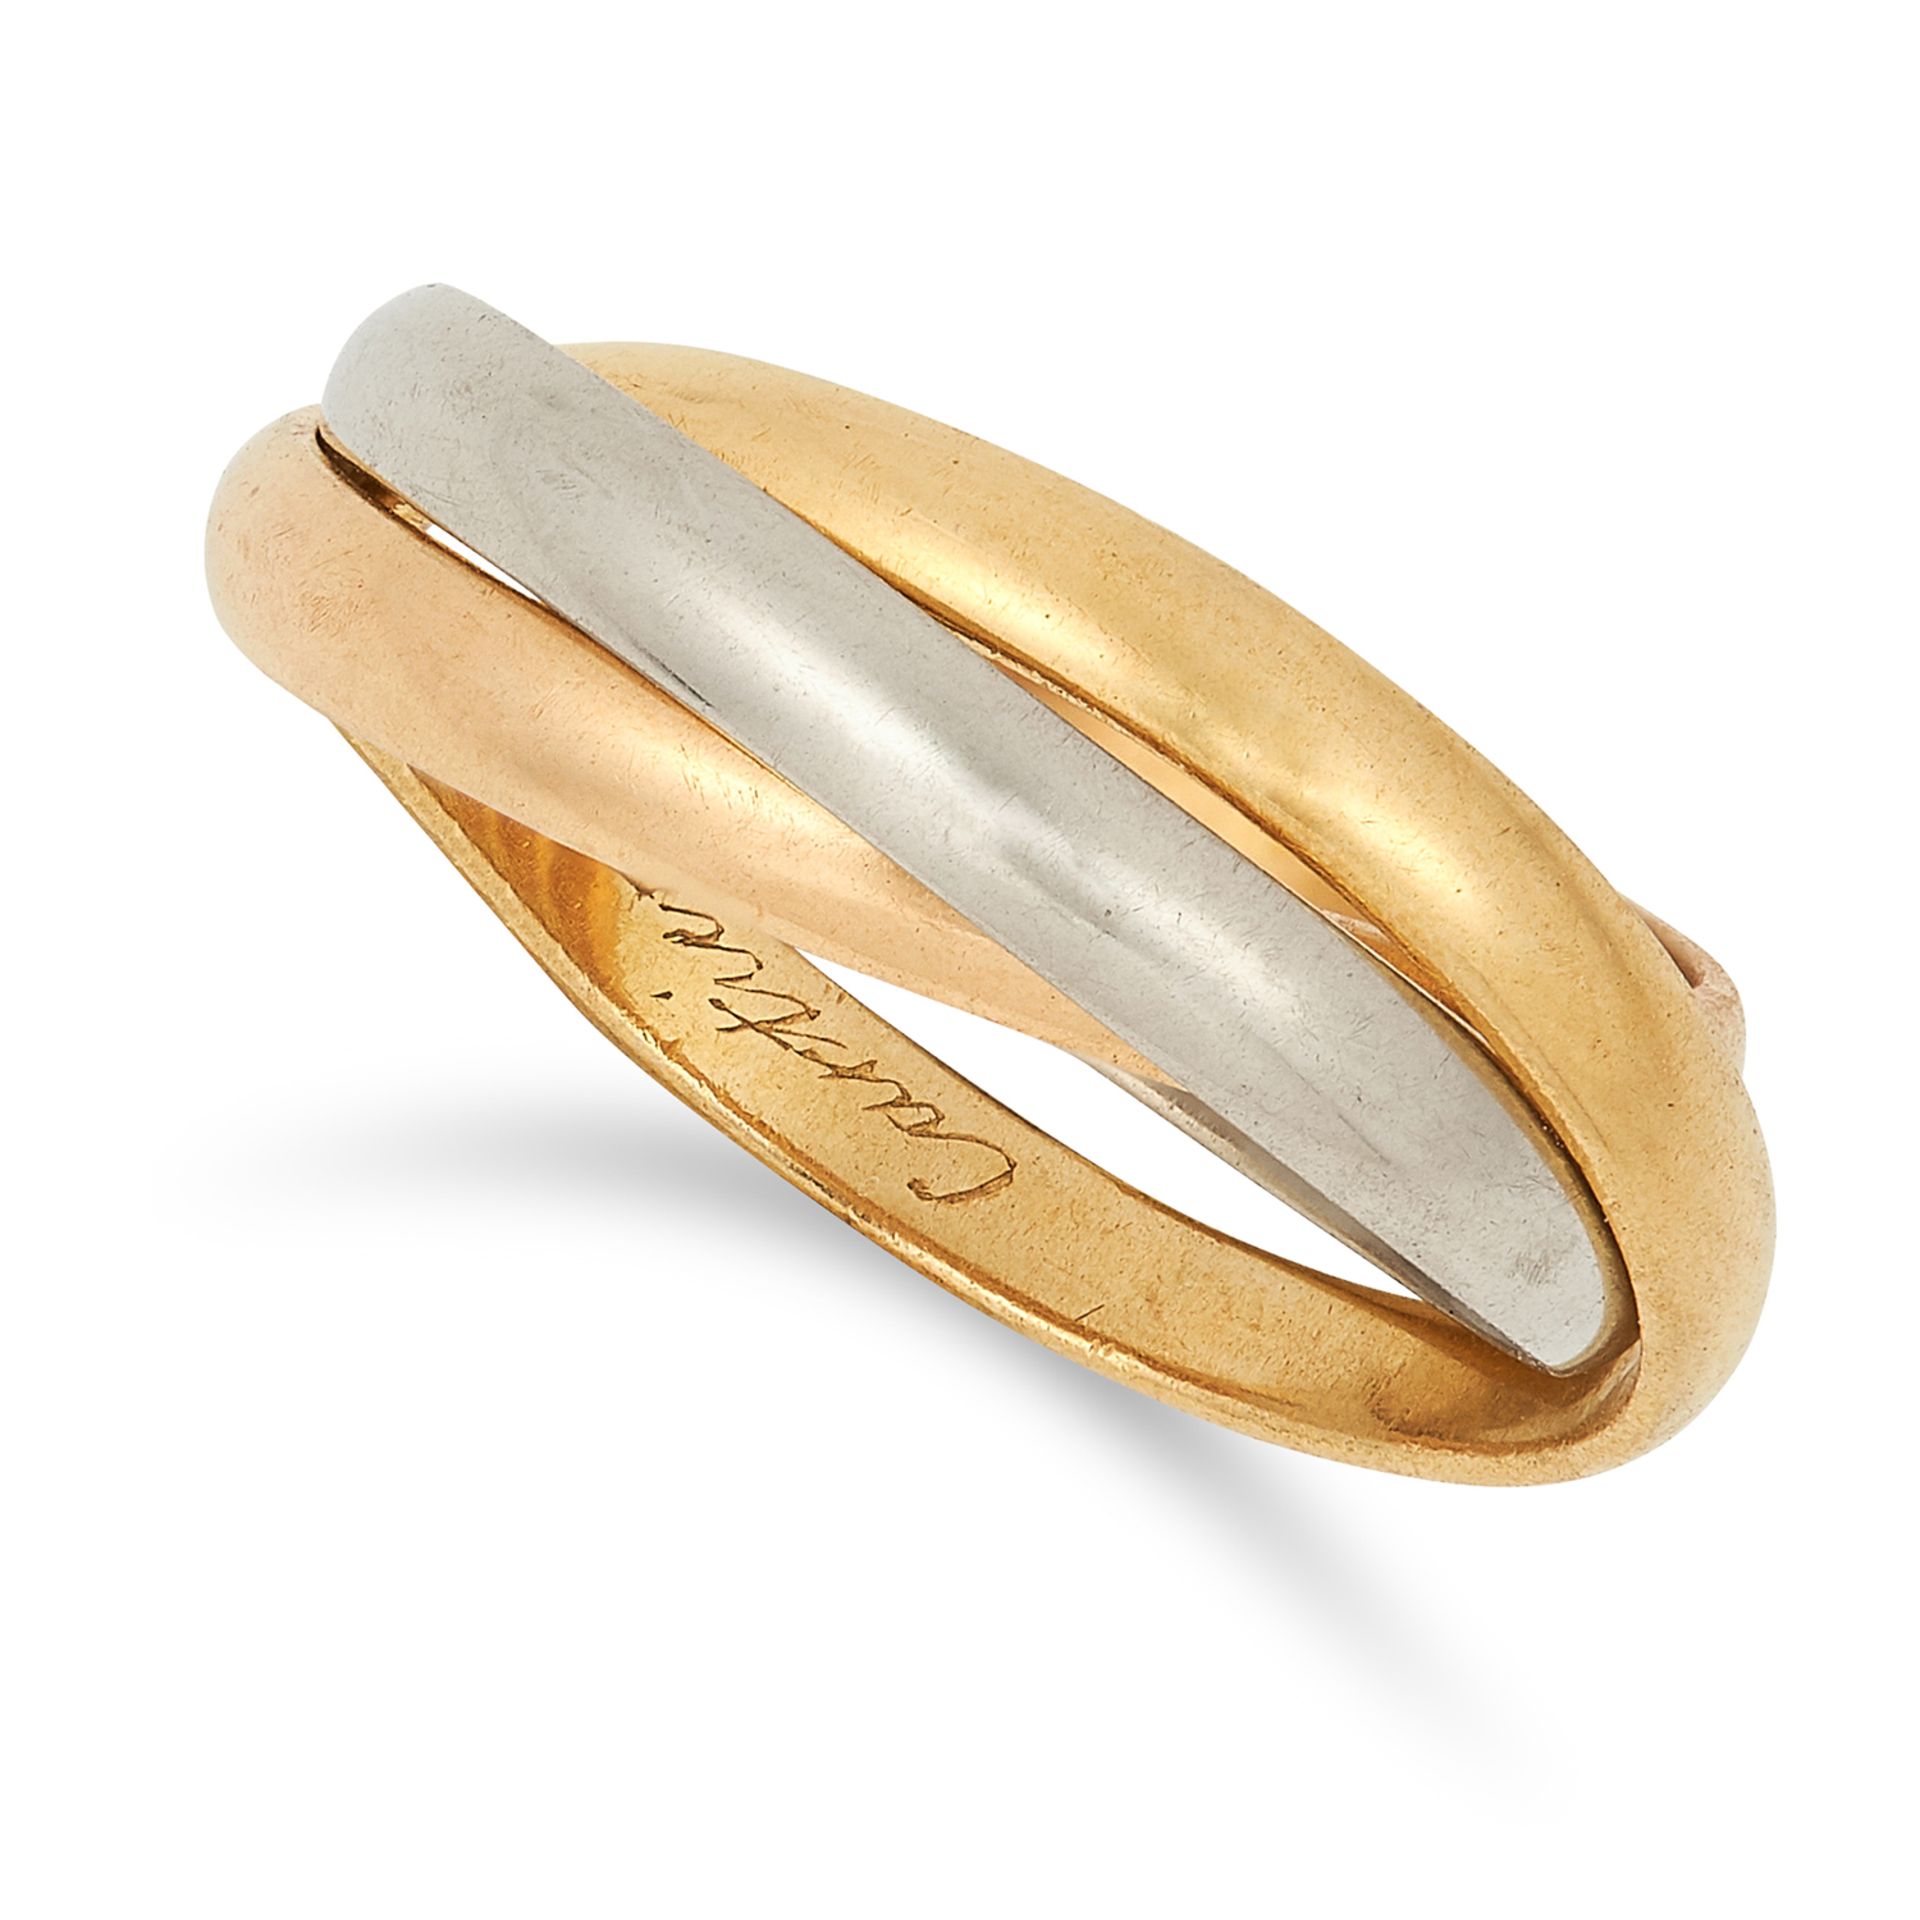 A TRINITY DE CARTIER BAND RING, CARTIER comprising of three gold bands, signed Cartier Paris, French